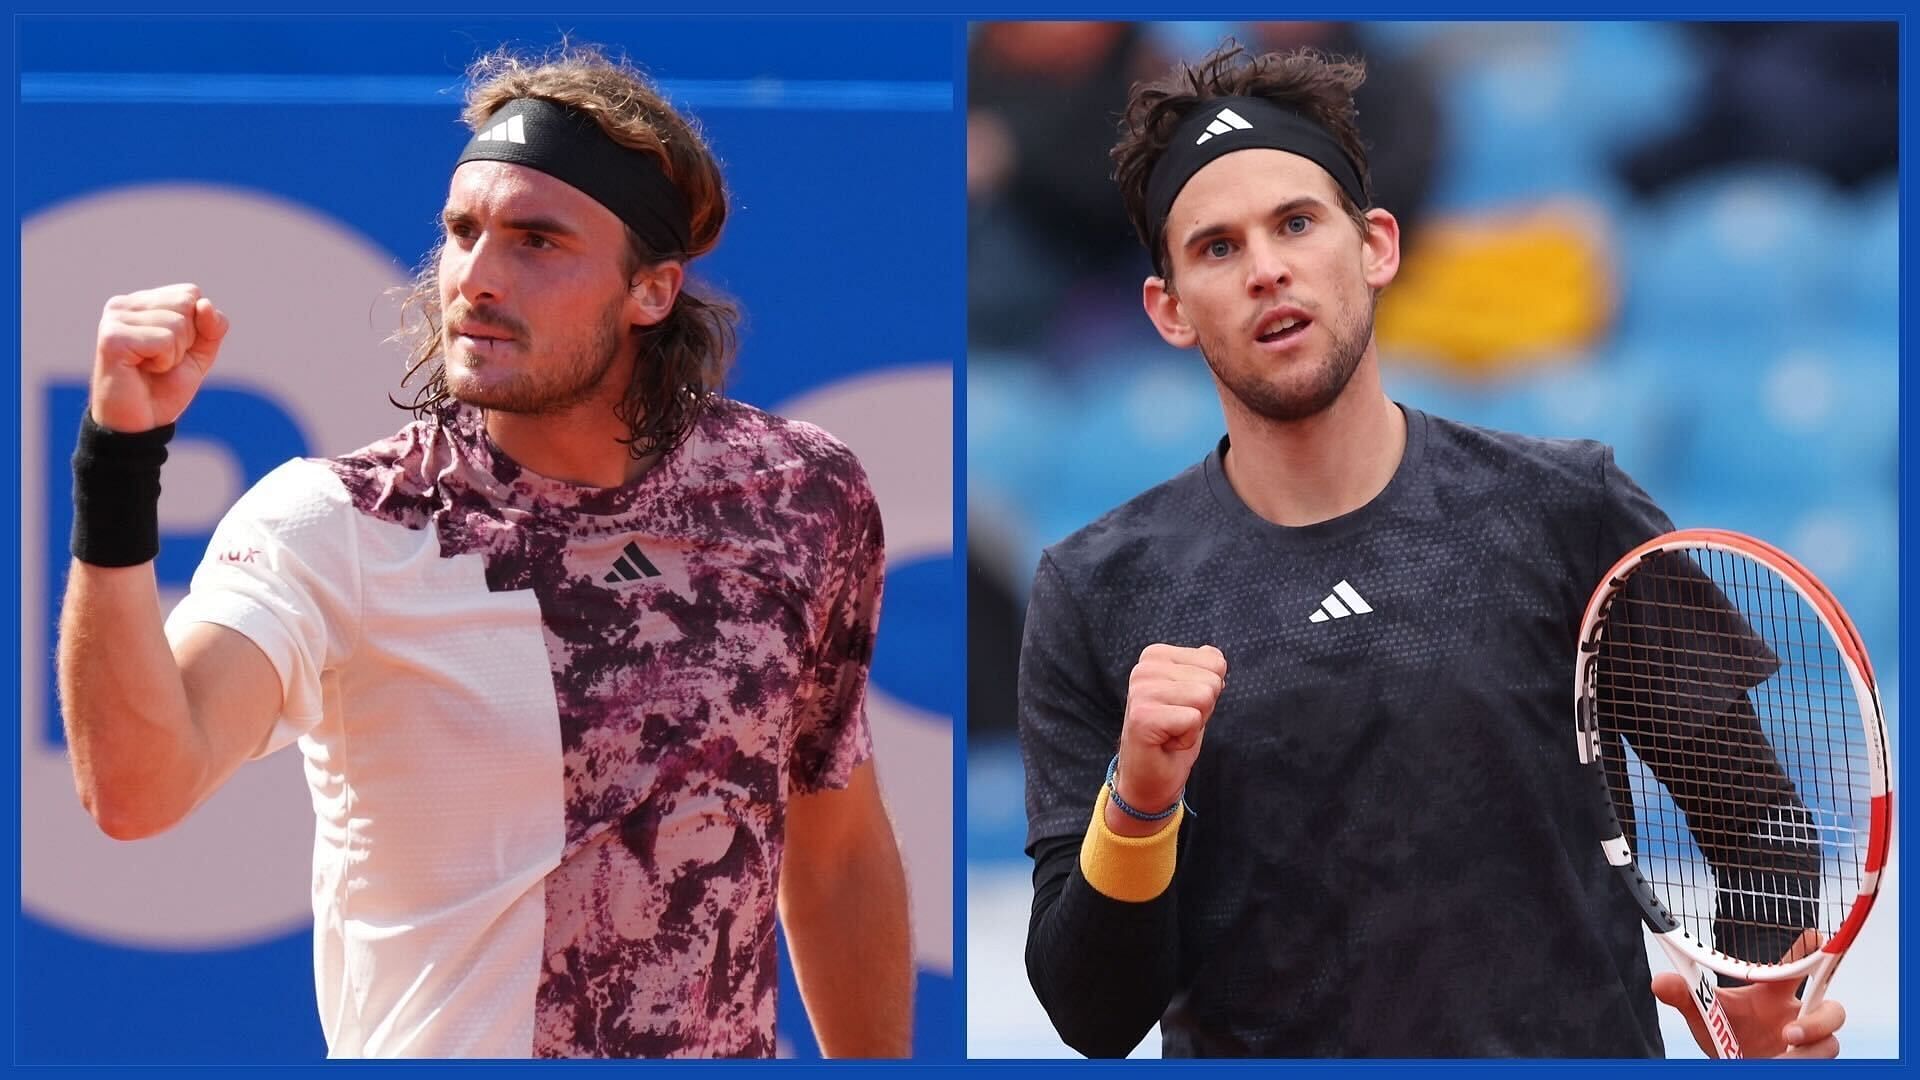 Madrid Open 2023 Stefanos Tsitsipas vs Dominic Thiem preview, head-to-head, prediction, odds, and pick